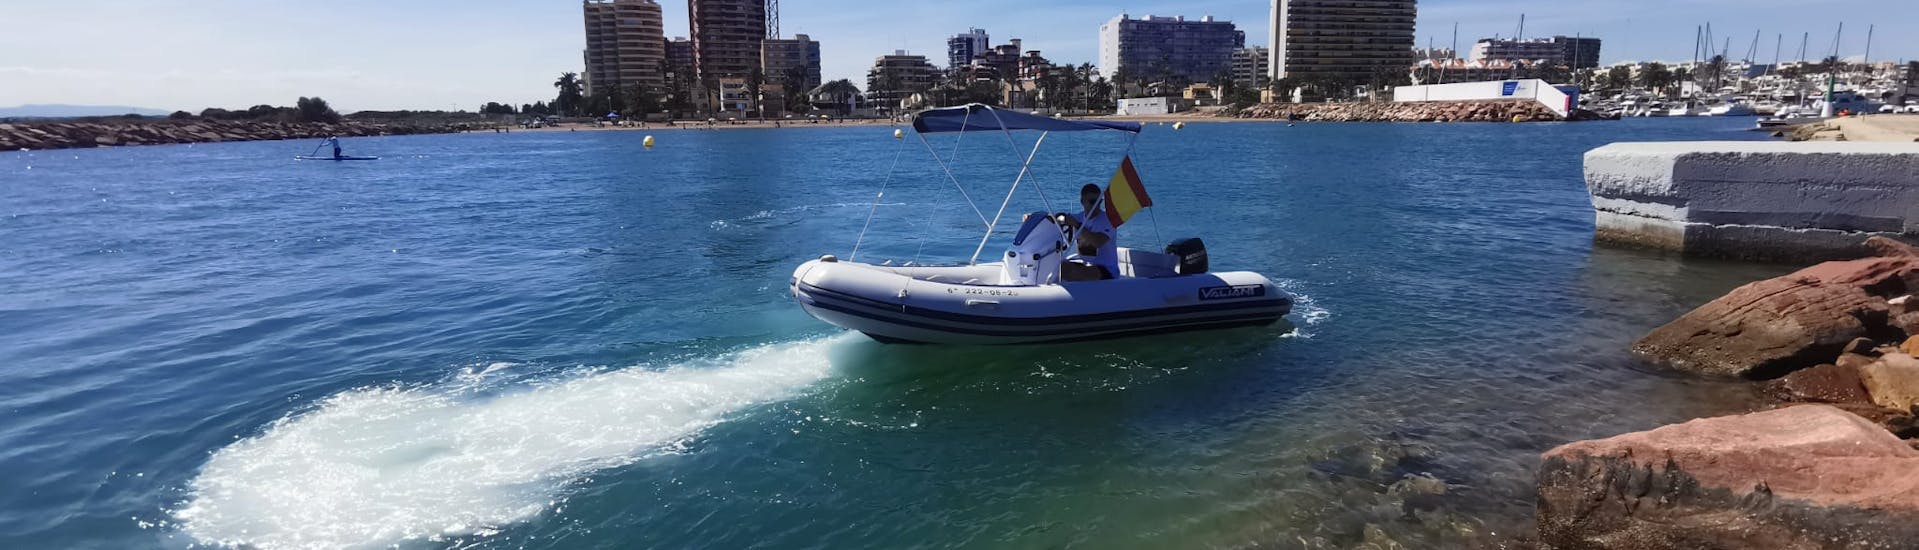 RIB Boat Rental in La Pobla de Farnals, Valencia (up to 7 people) without Licence.